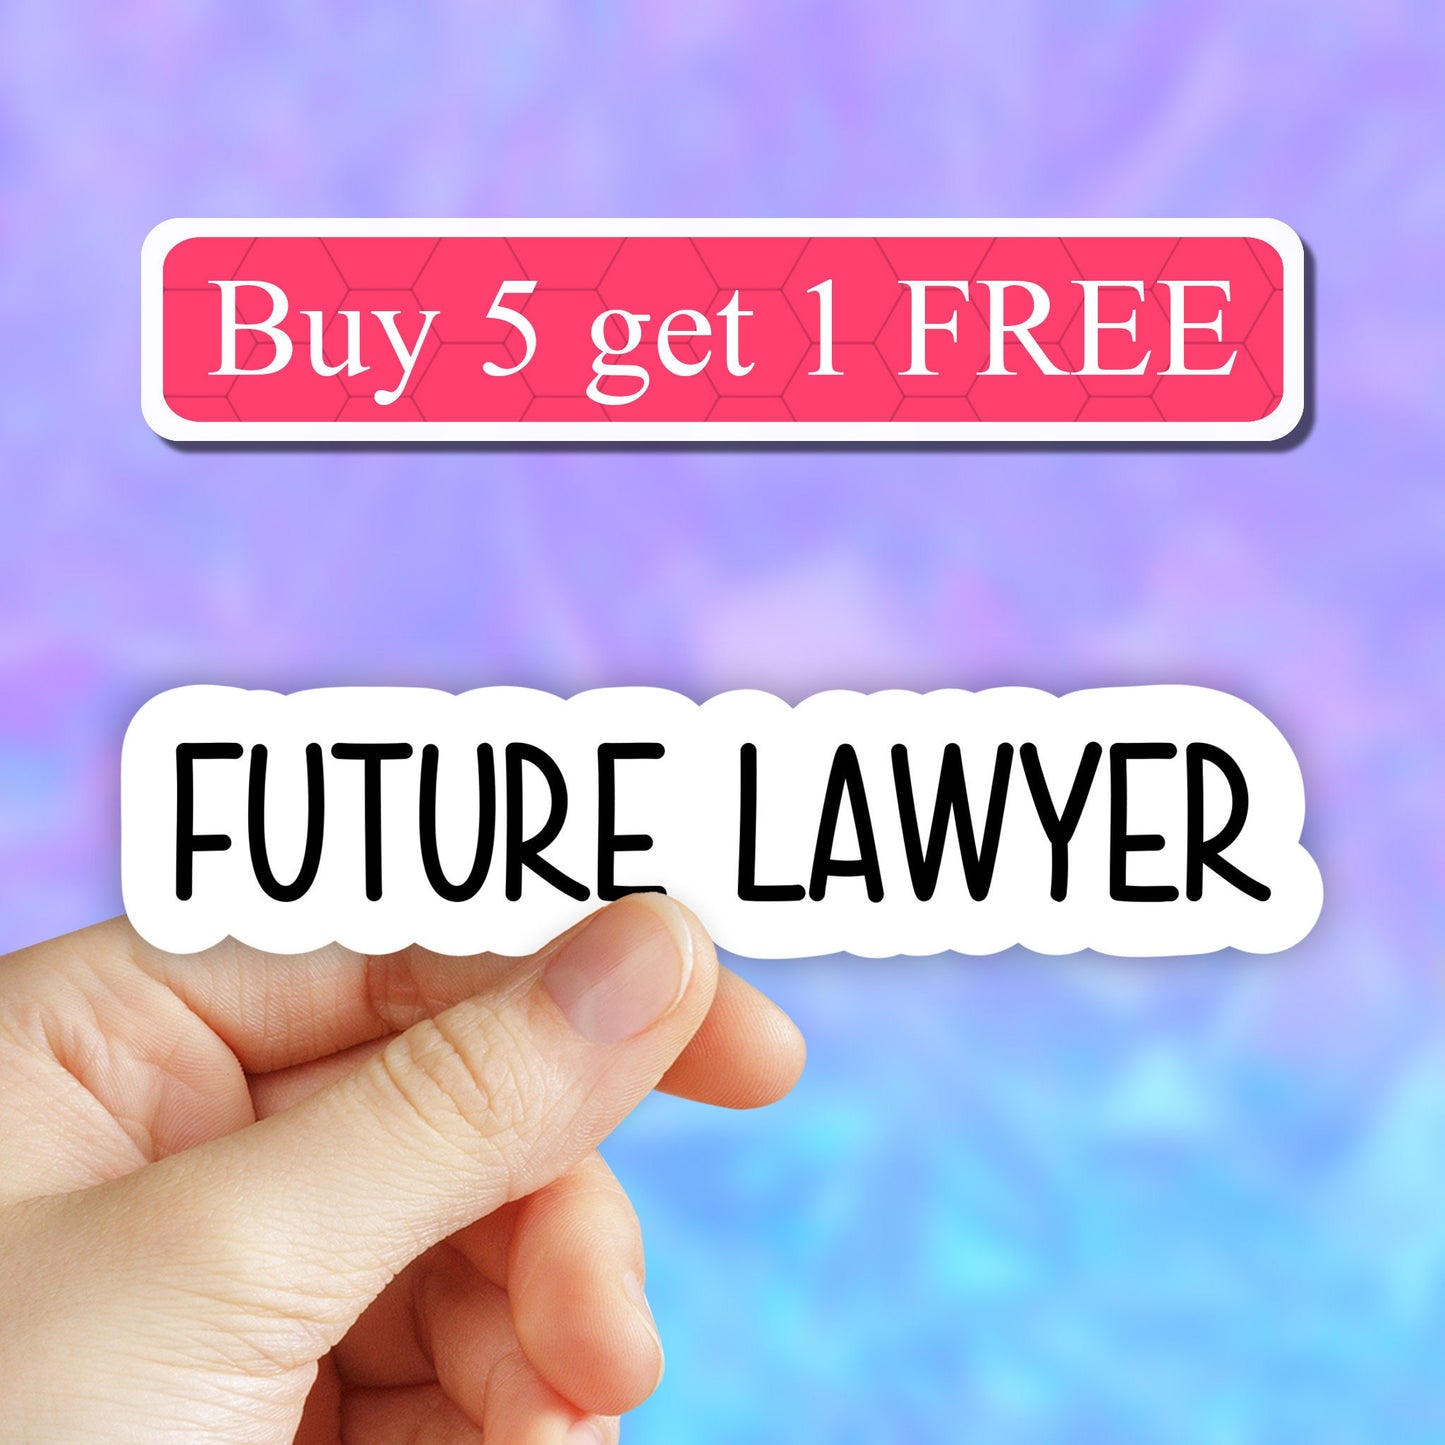 Future Lawyer sticker, lawyer laptop stickers, waterbottle stickers, computer stickers, tumbler decal, vinyl stickers, occupation stickers